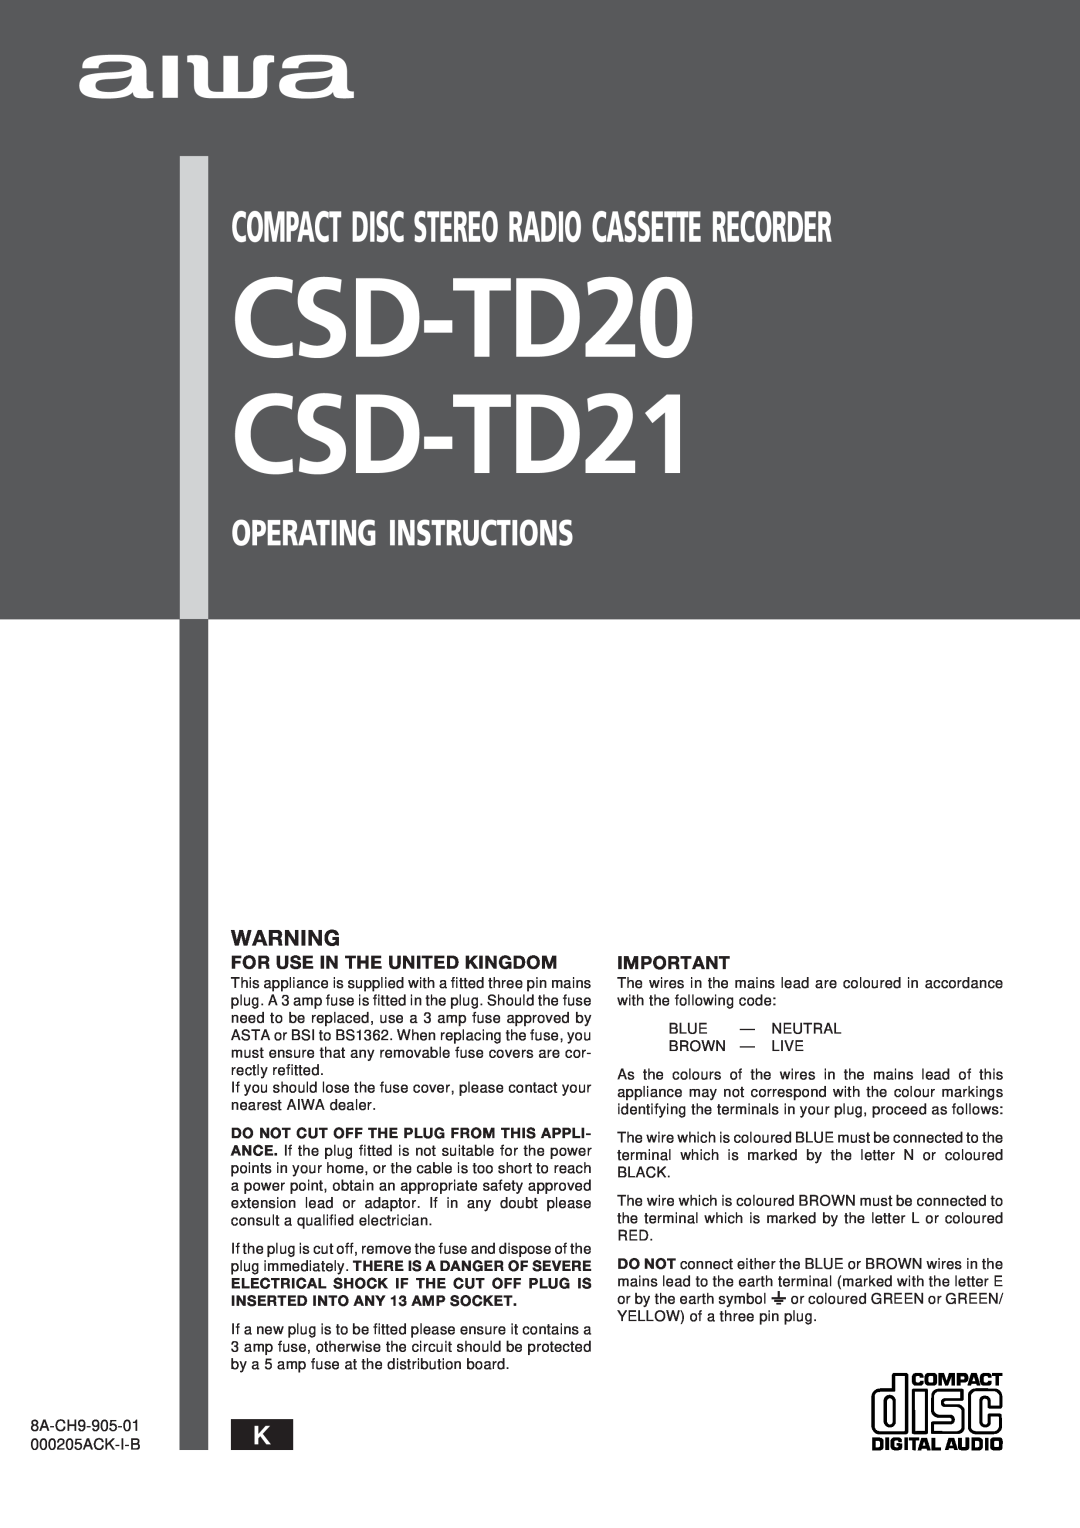 Aiwa manual For Use In The United Kingdom, CSD-TD20 CSD-TD21, Operating Instructions 